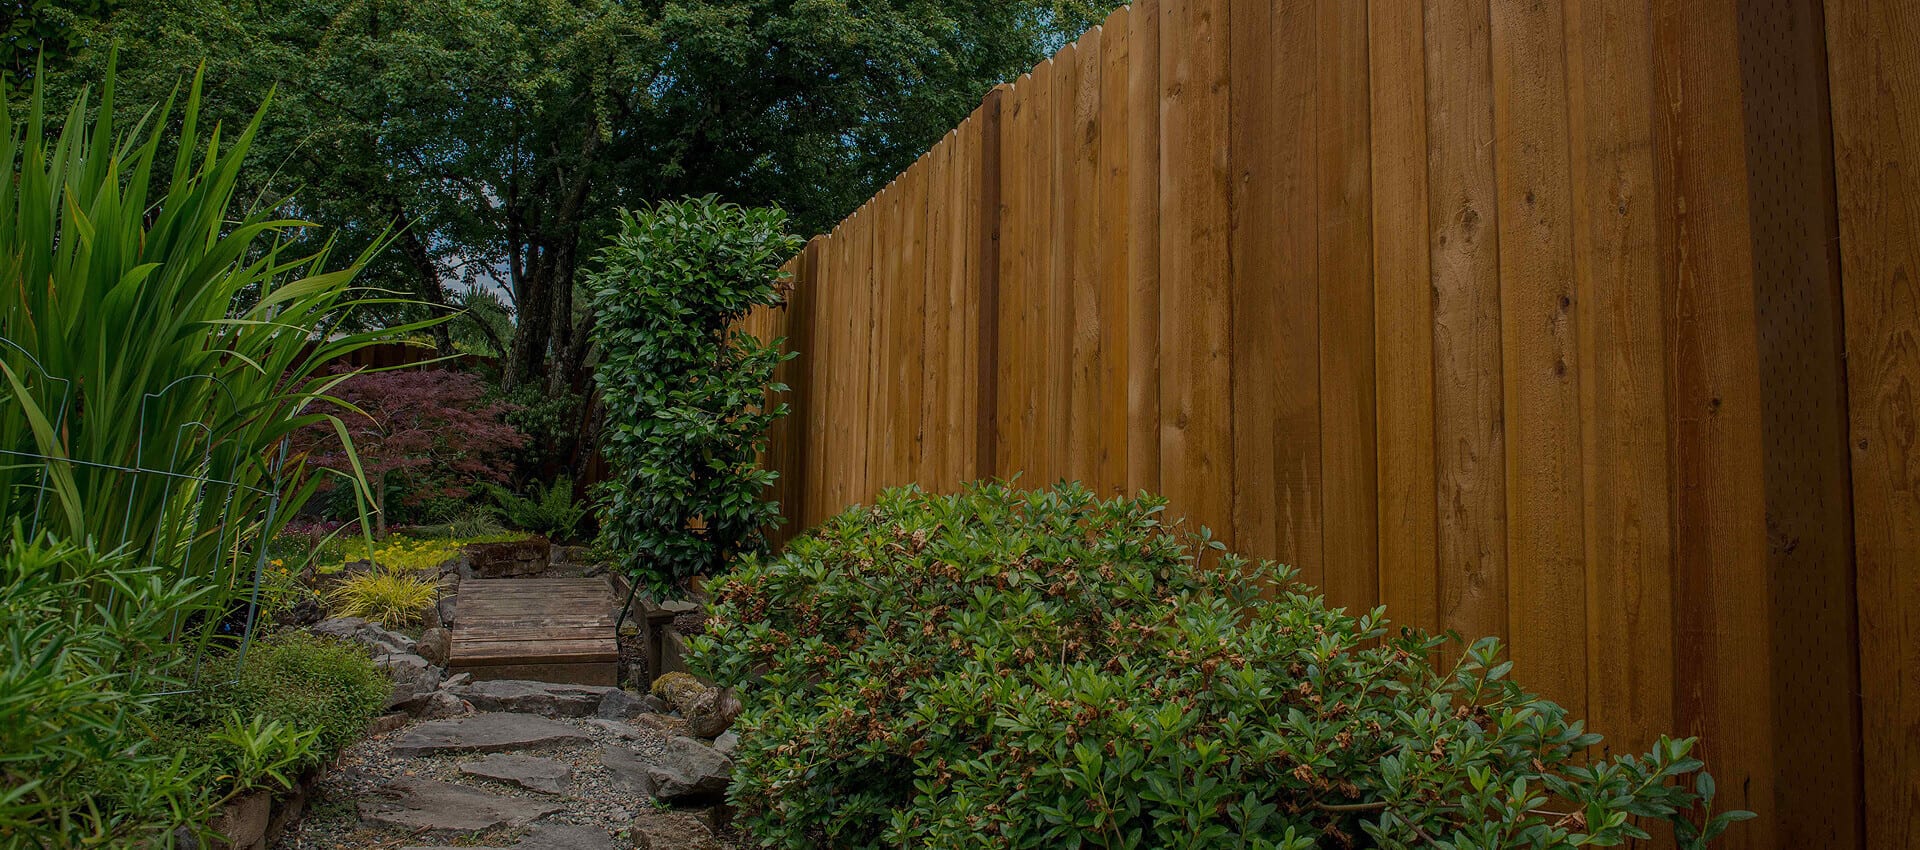 Specrail Fencing: What Are My Options?